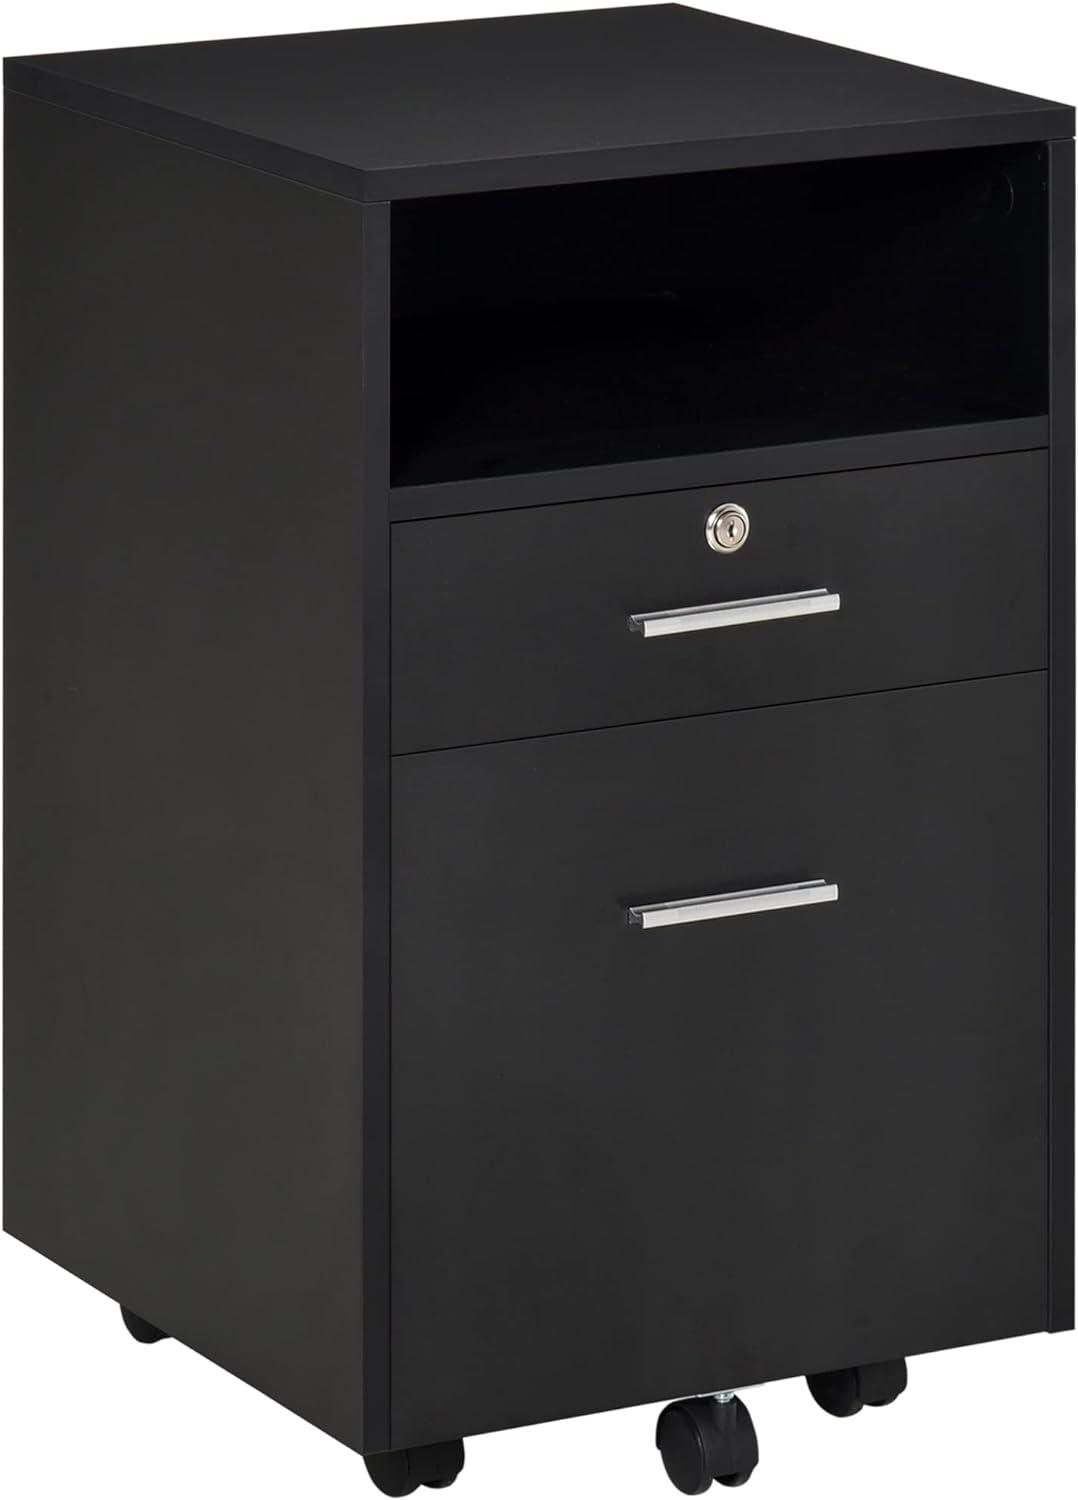 Lockable 2-Drawer Vertical File Cabinet with Wheels for A4 and Letter Size, Black - Furniture4Design